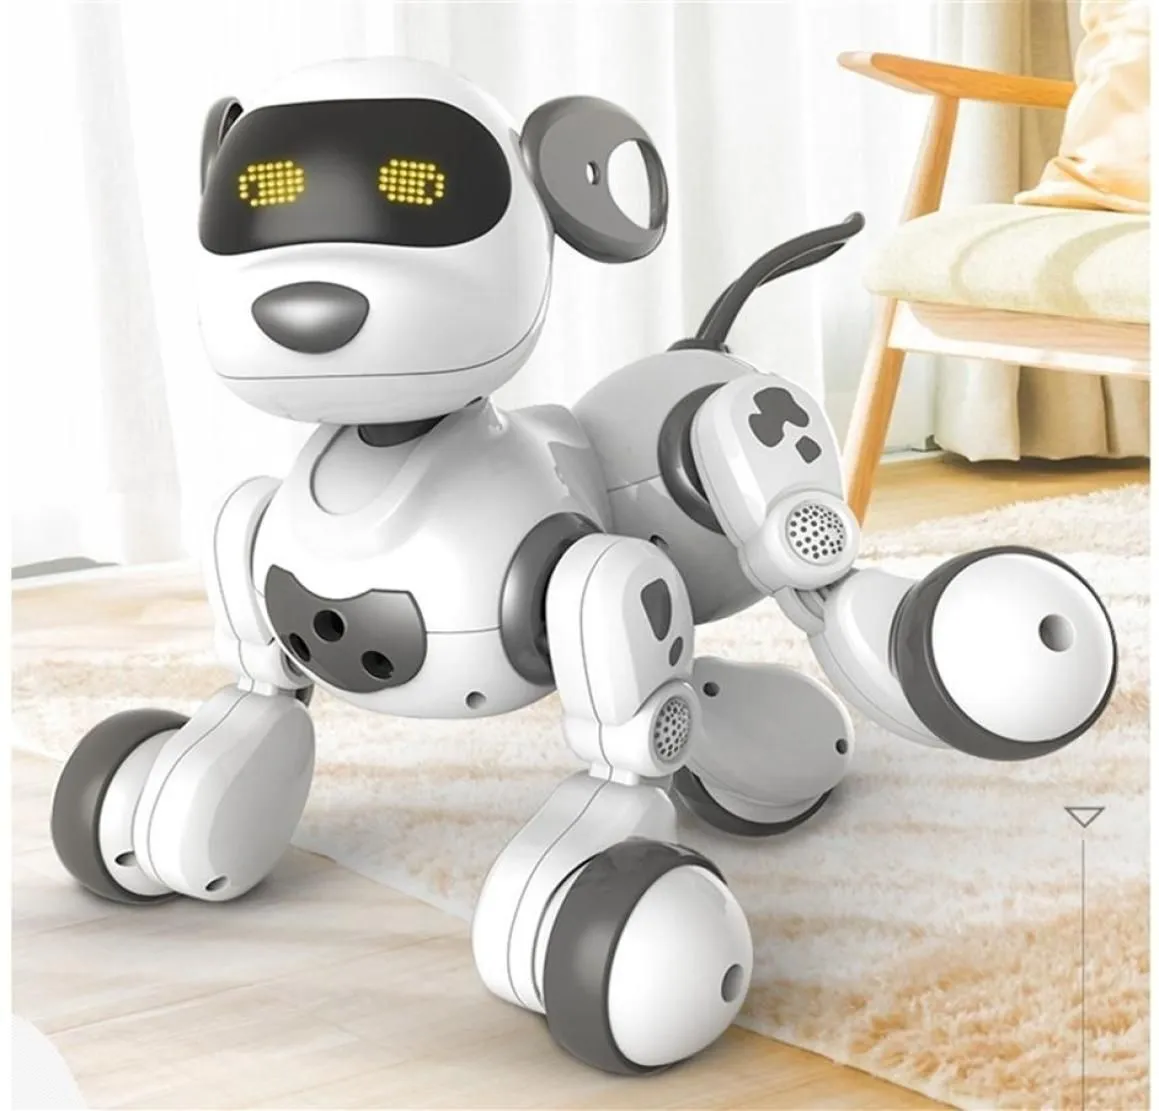 Migne Dog Intelligent Robot Control Toy Talking Walk 209268590 Gift Interactive Electronic Puppy Animal For Pet Toys Model Children Remo Xaos